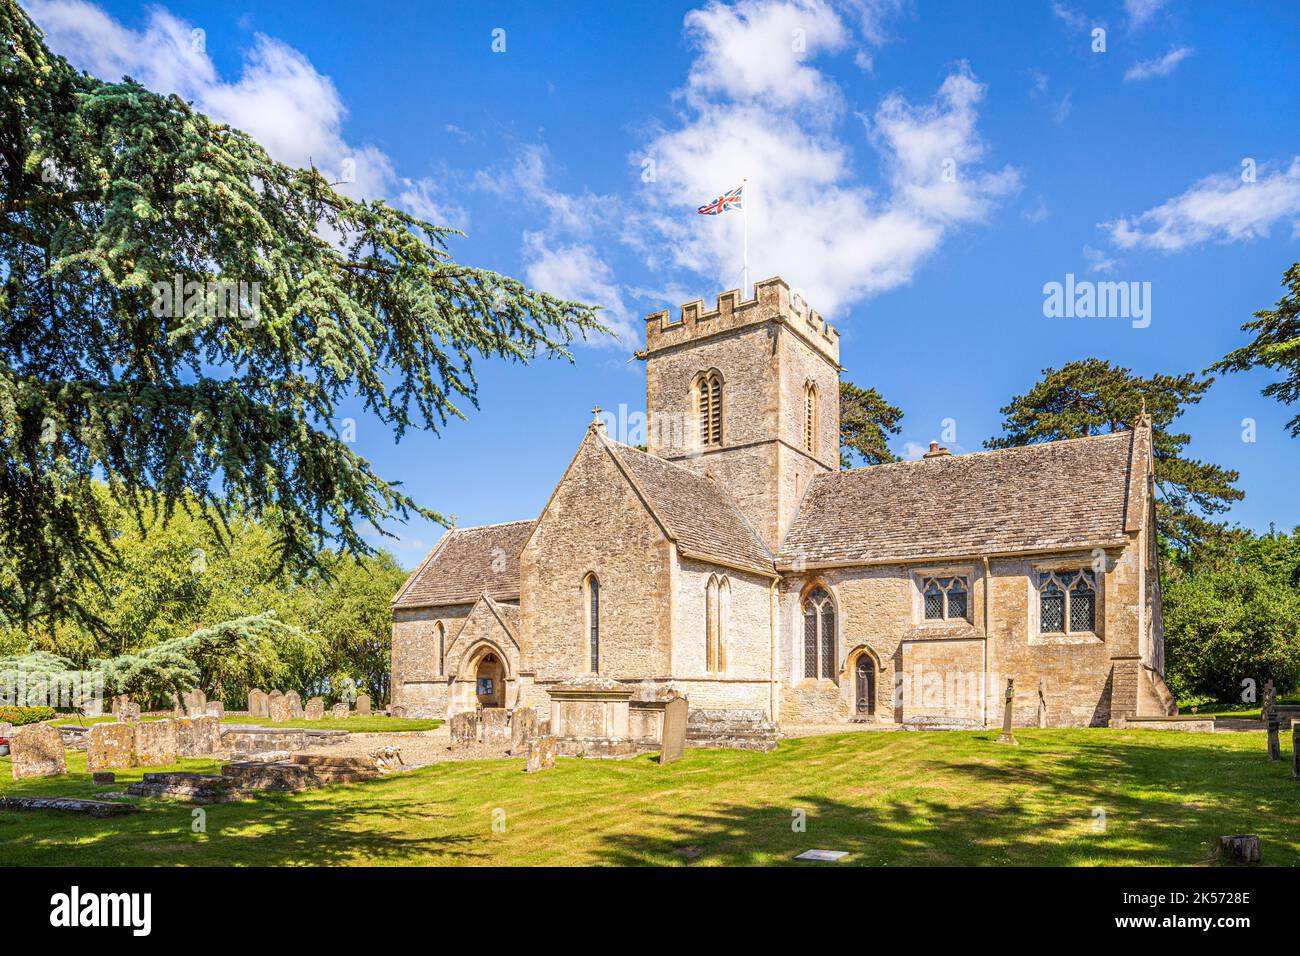 The church of St Mary the Virgin in the Cotswold village of Meysey Hampton, Gloucestershire, England UK Stock Photo